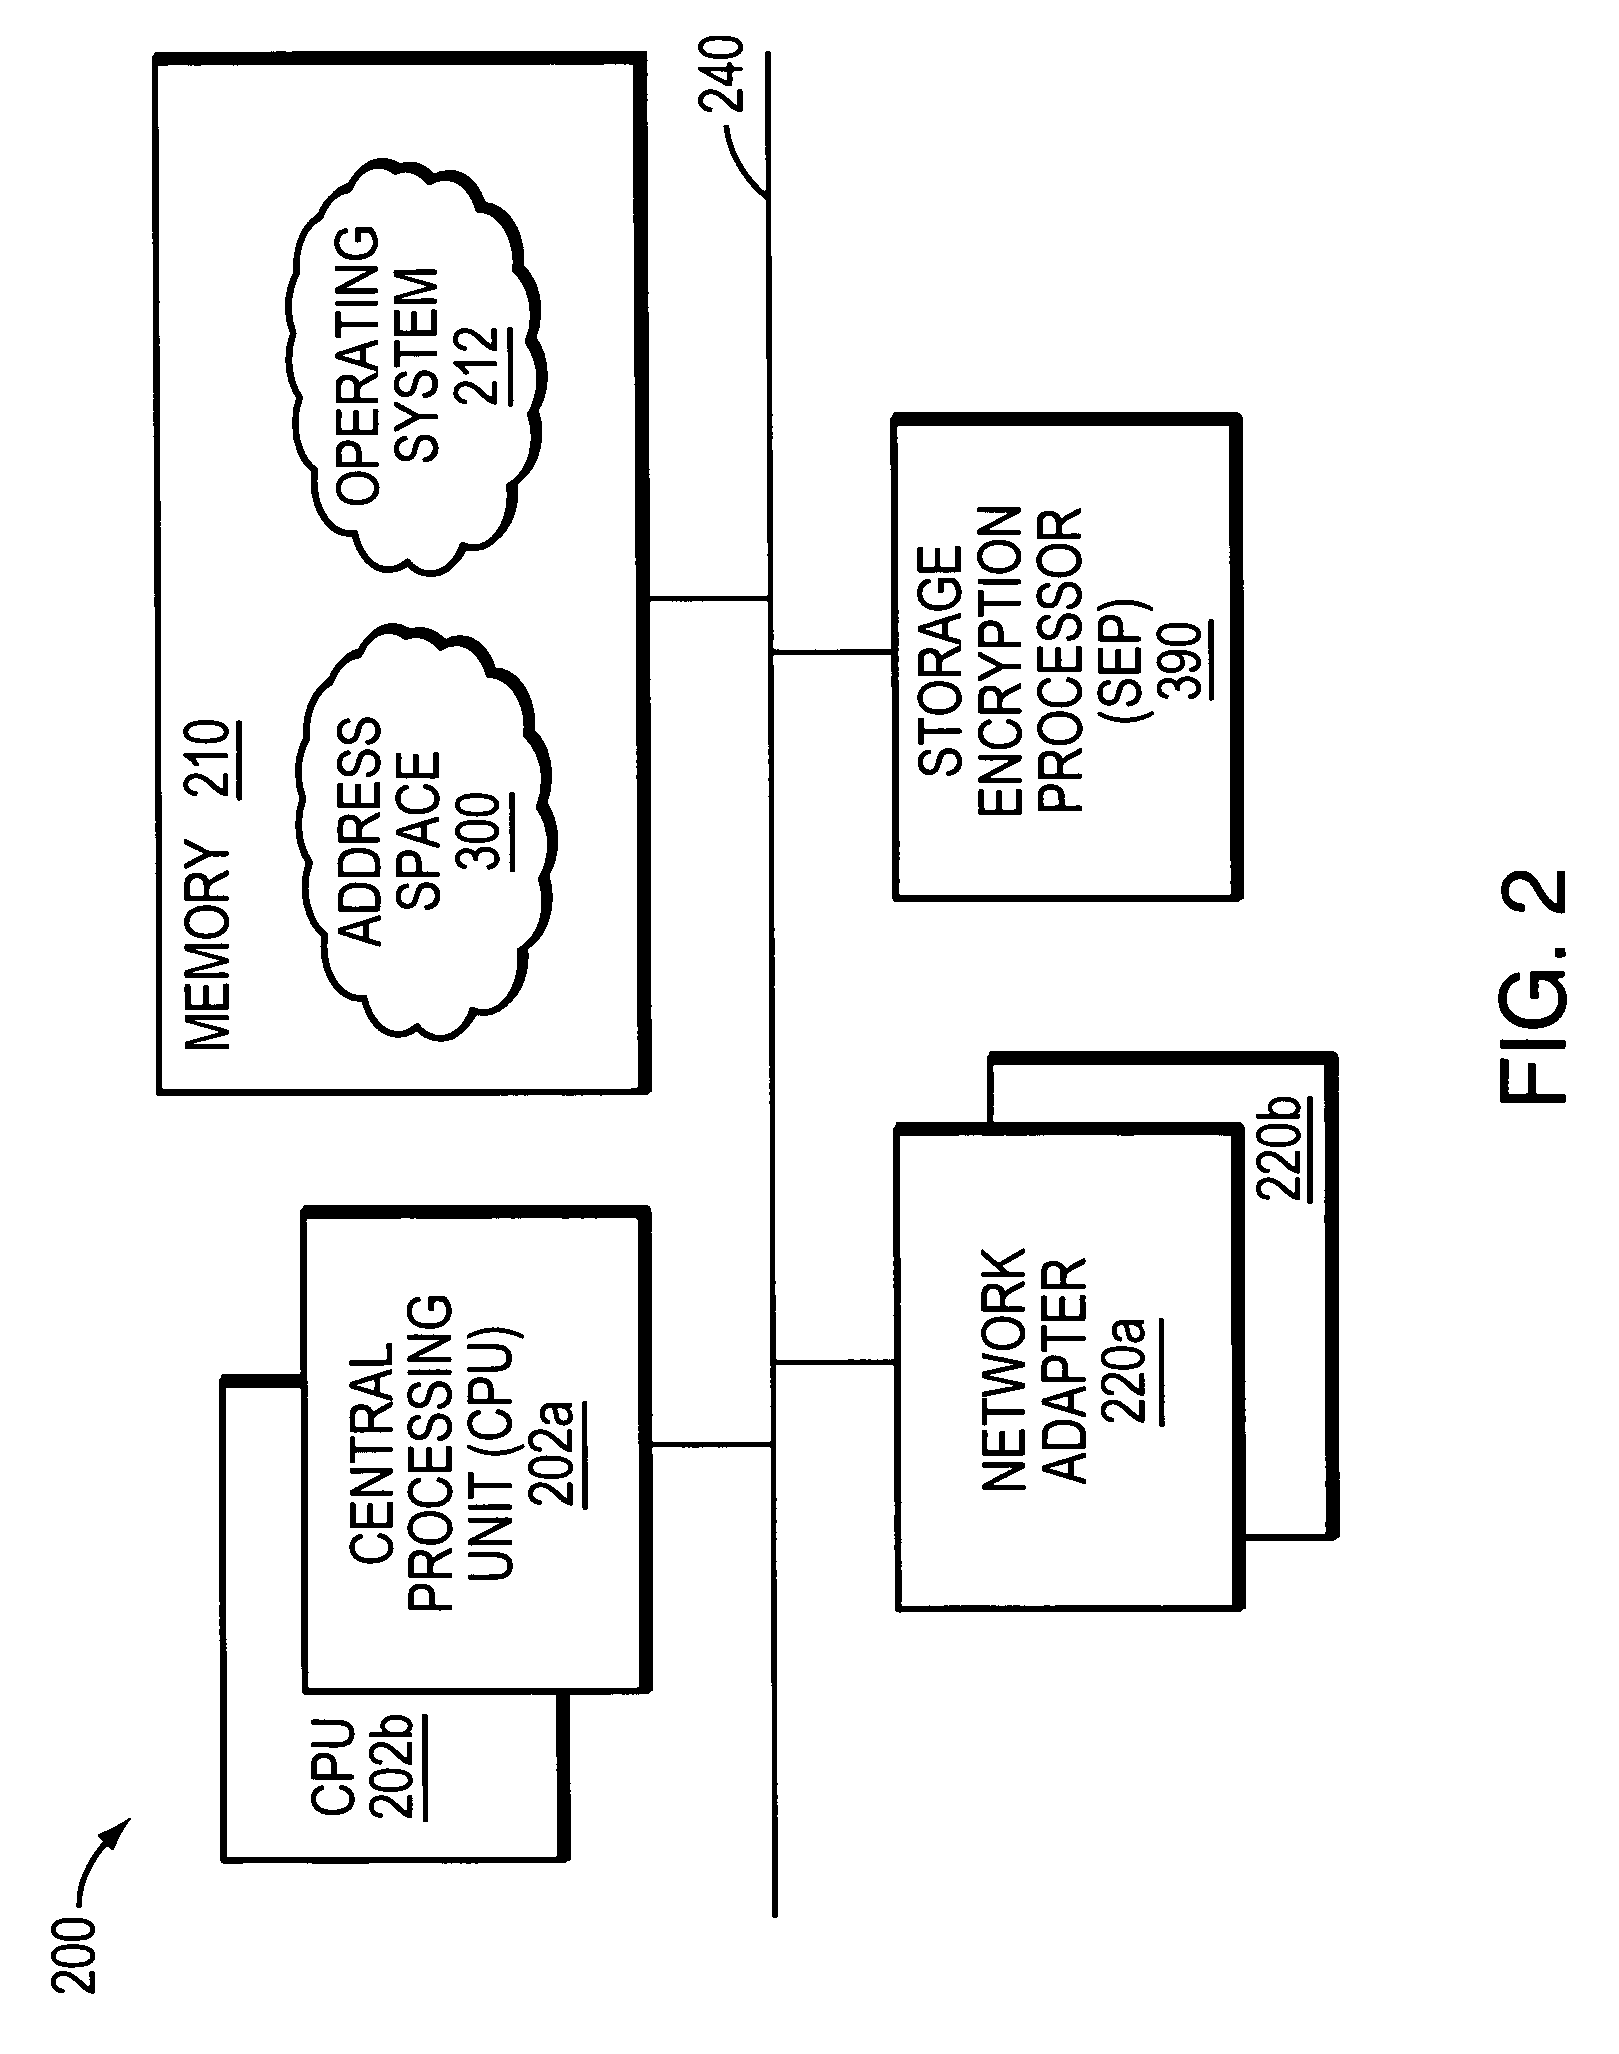 System and method for efficiently deleting a file from secure storage served by a storage system